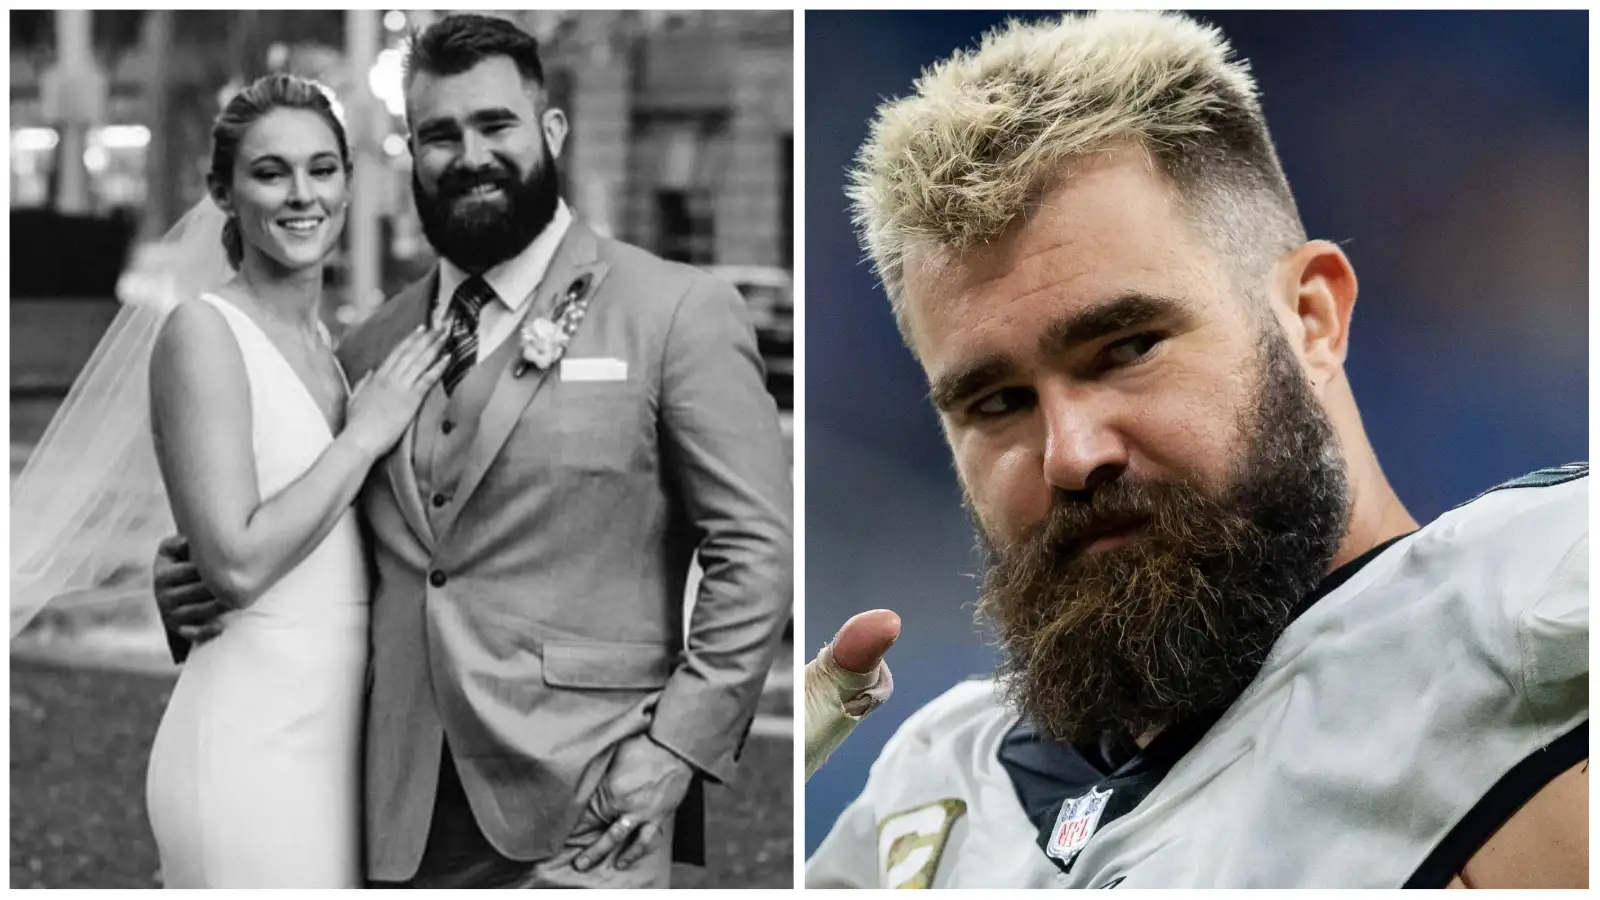 “Romantic Gesture: Jason Kelce and Kylie Celebrate Wedding Anniversary, Jason Makes Heartfelt Toast to His Beautiful Wife: ‘You Are the Most Beautiful Thing That Has Happened to Me, I Bless the Day I Met You'”